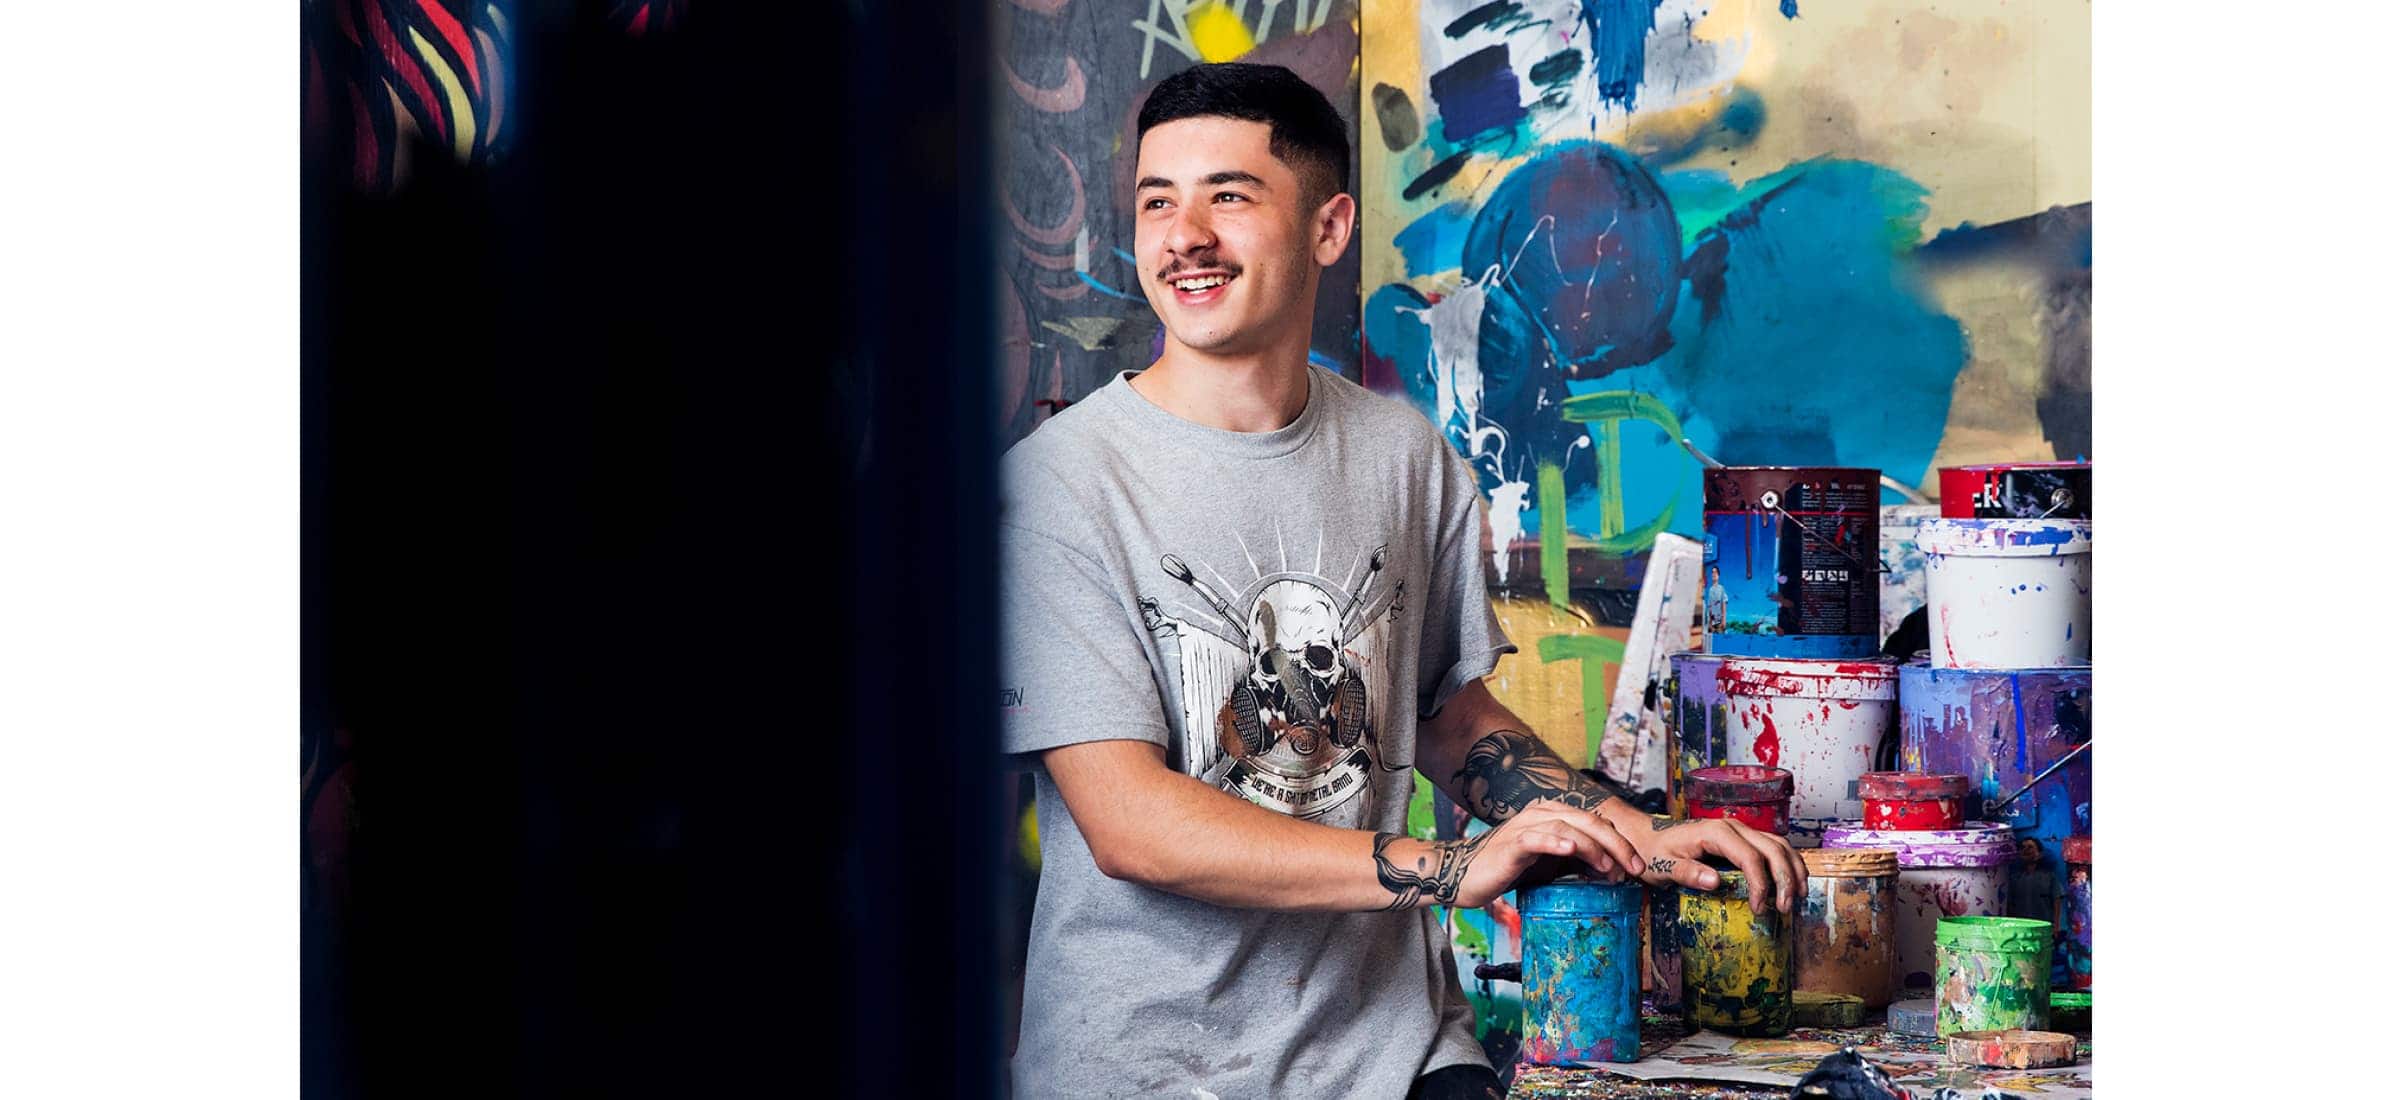 One of Apparition Media’s painters smiling with a collection of paint cans in the studio.